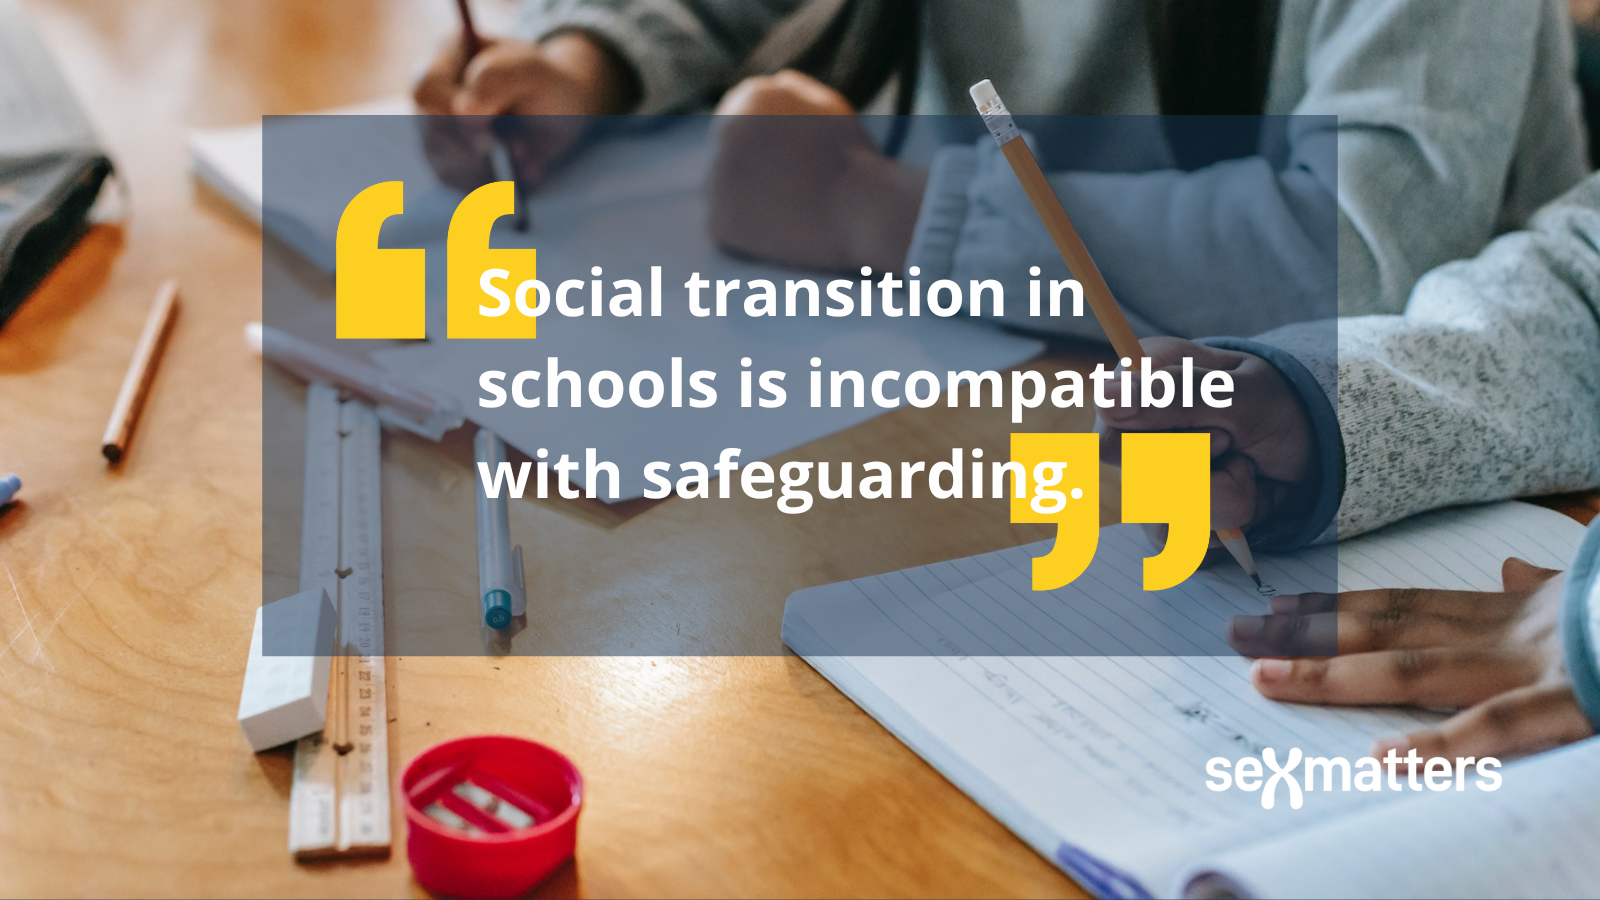 "Social transition in schools is incompatible with safeguarding."